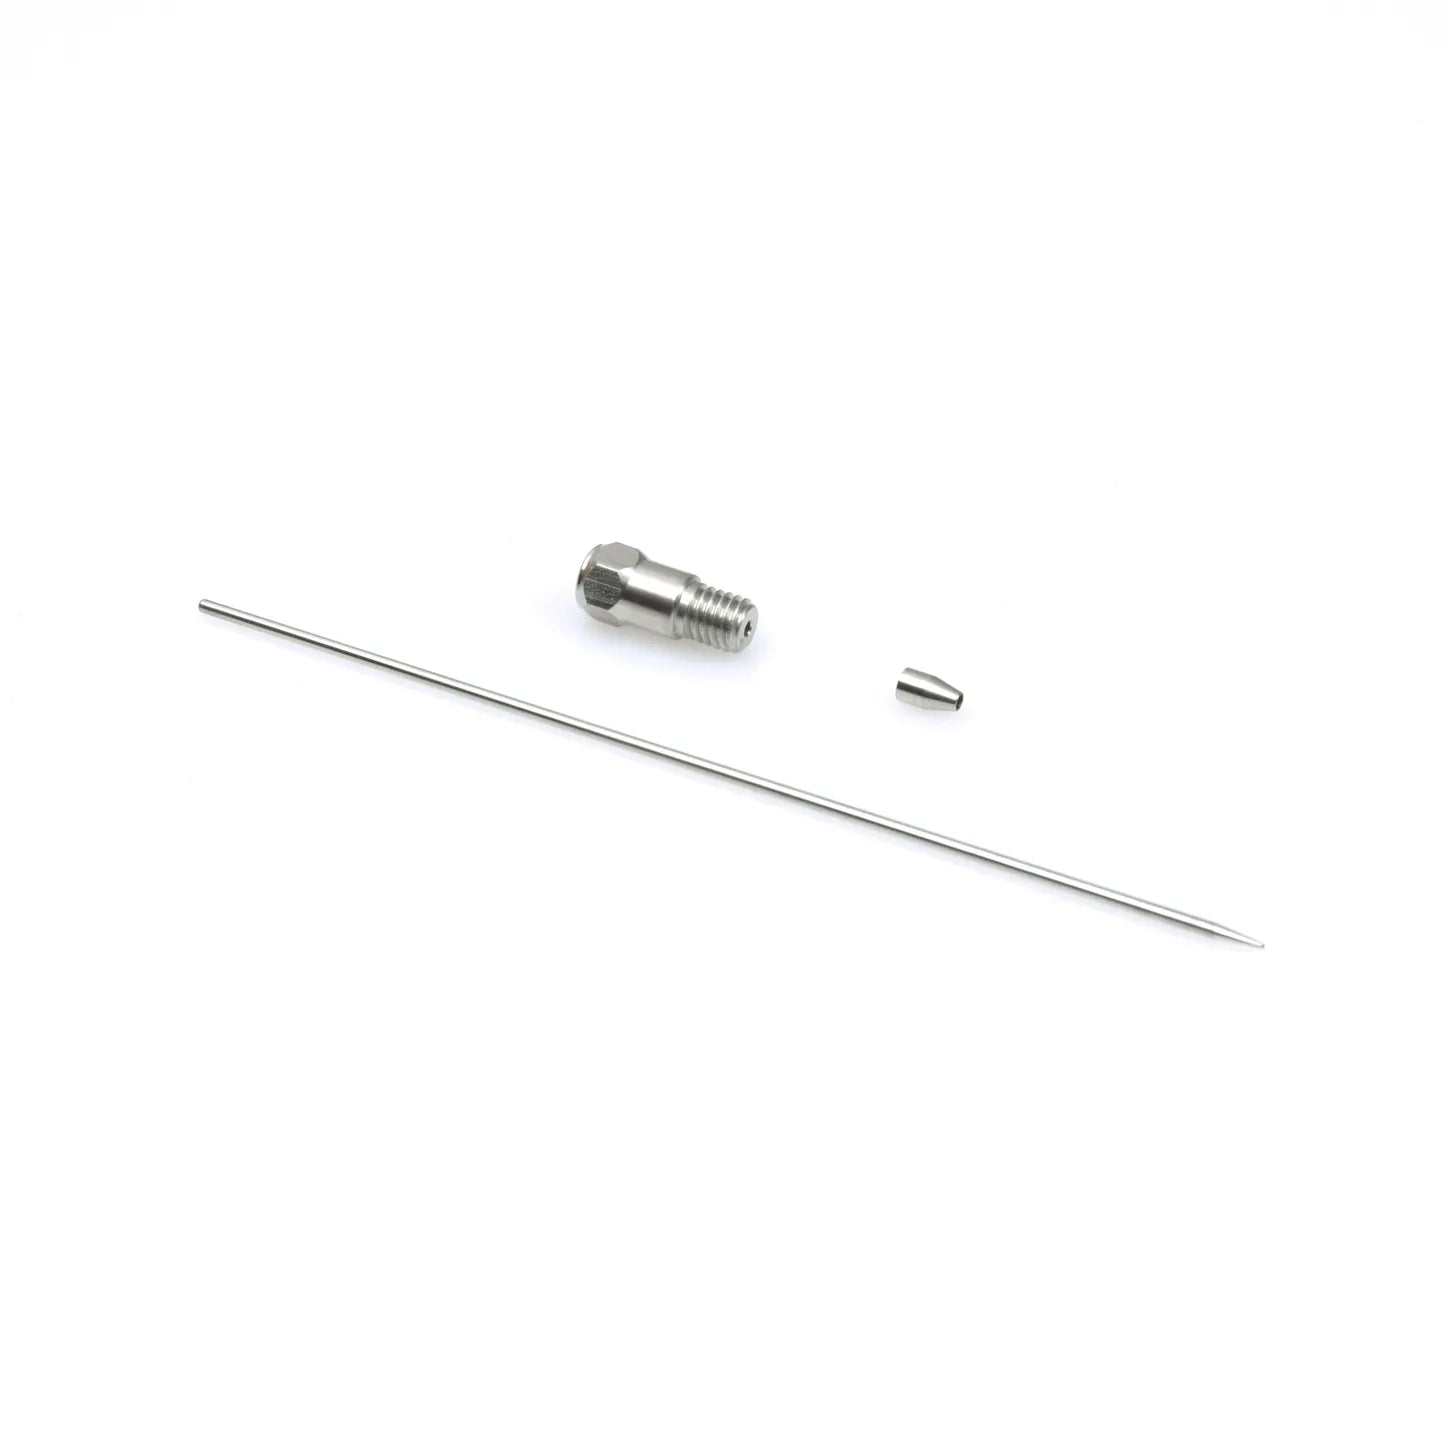 Pt Coated Needle, 20 Series, Comparable to Shimadzu # 228-41024-93